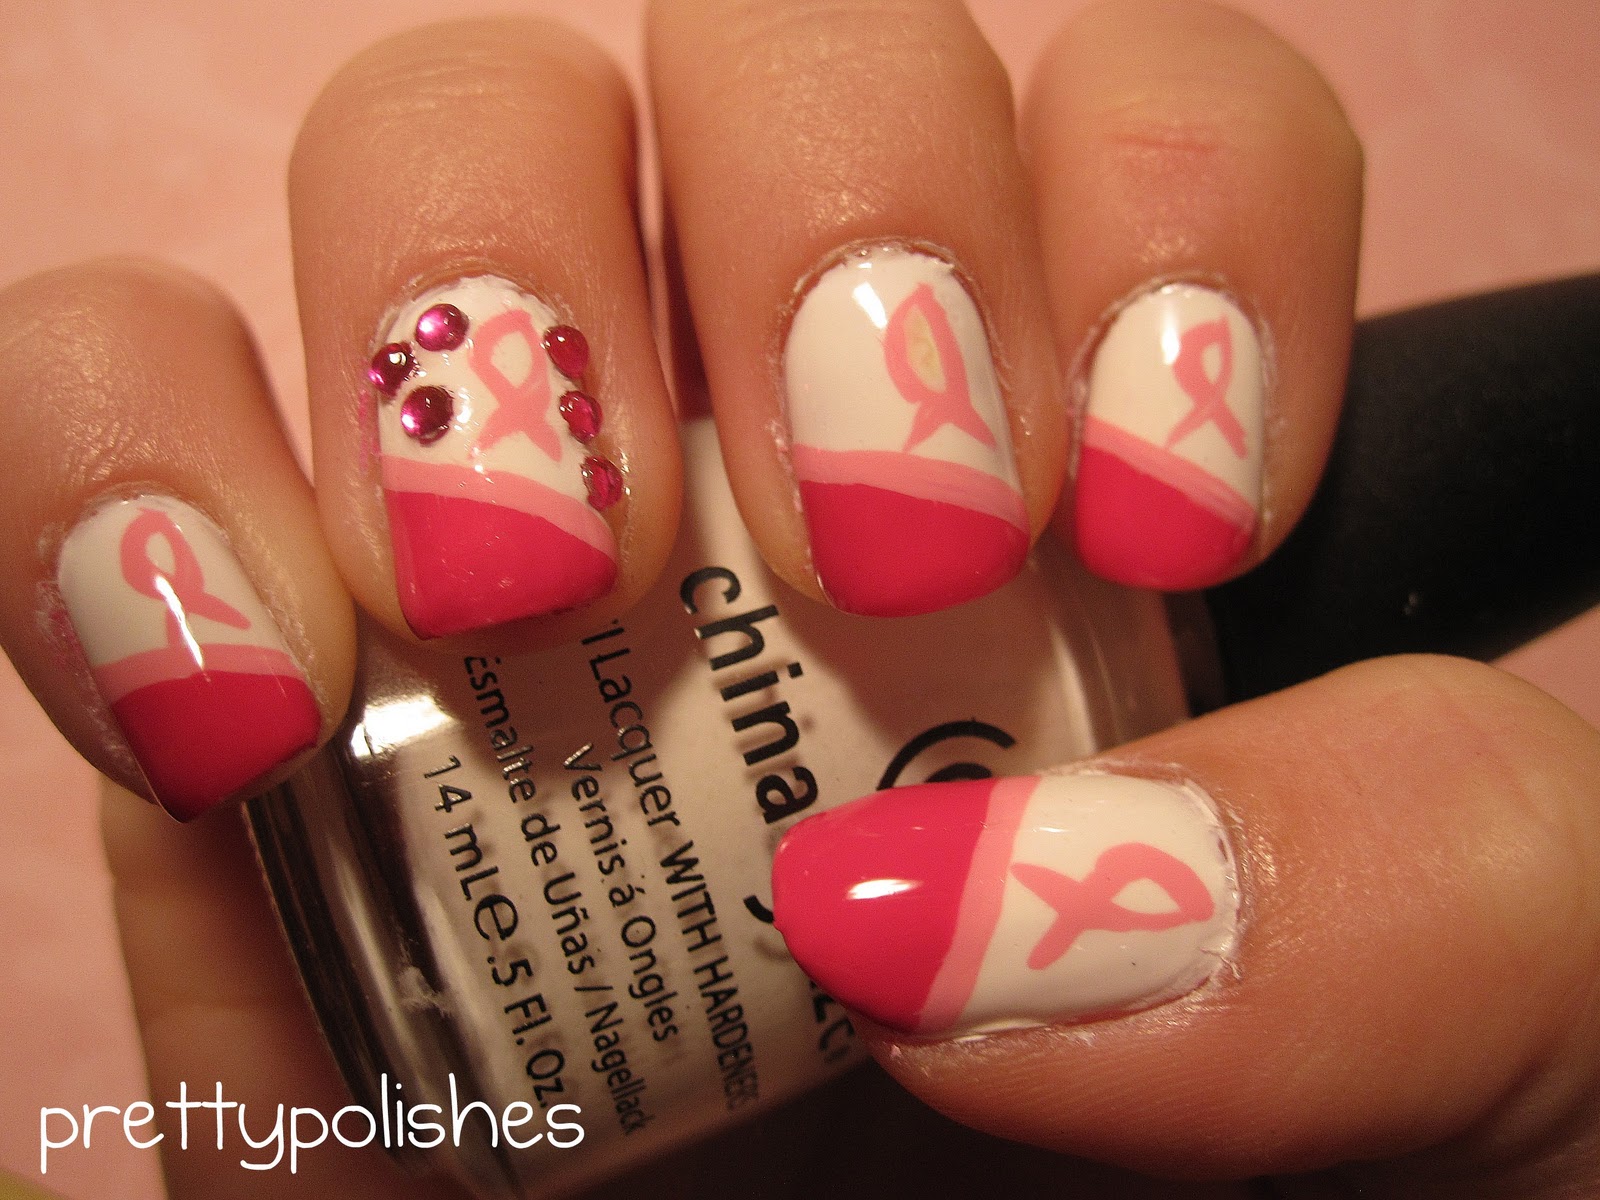 1. Breast Cancer Awareness Nail Art Decals - wide 9